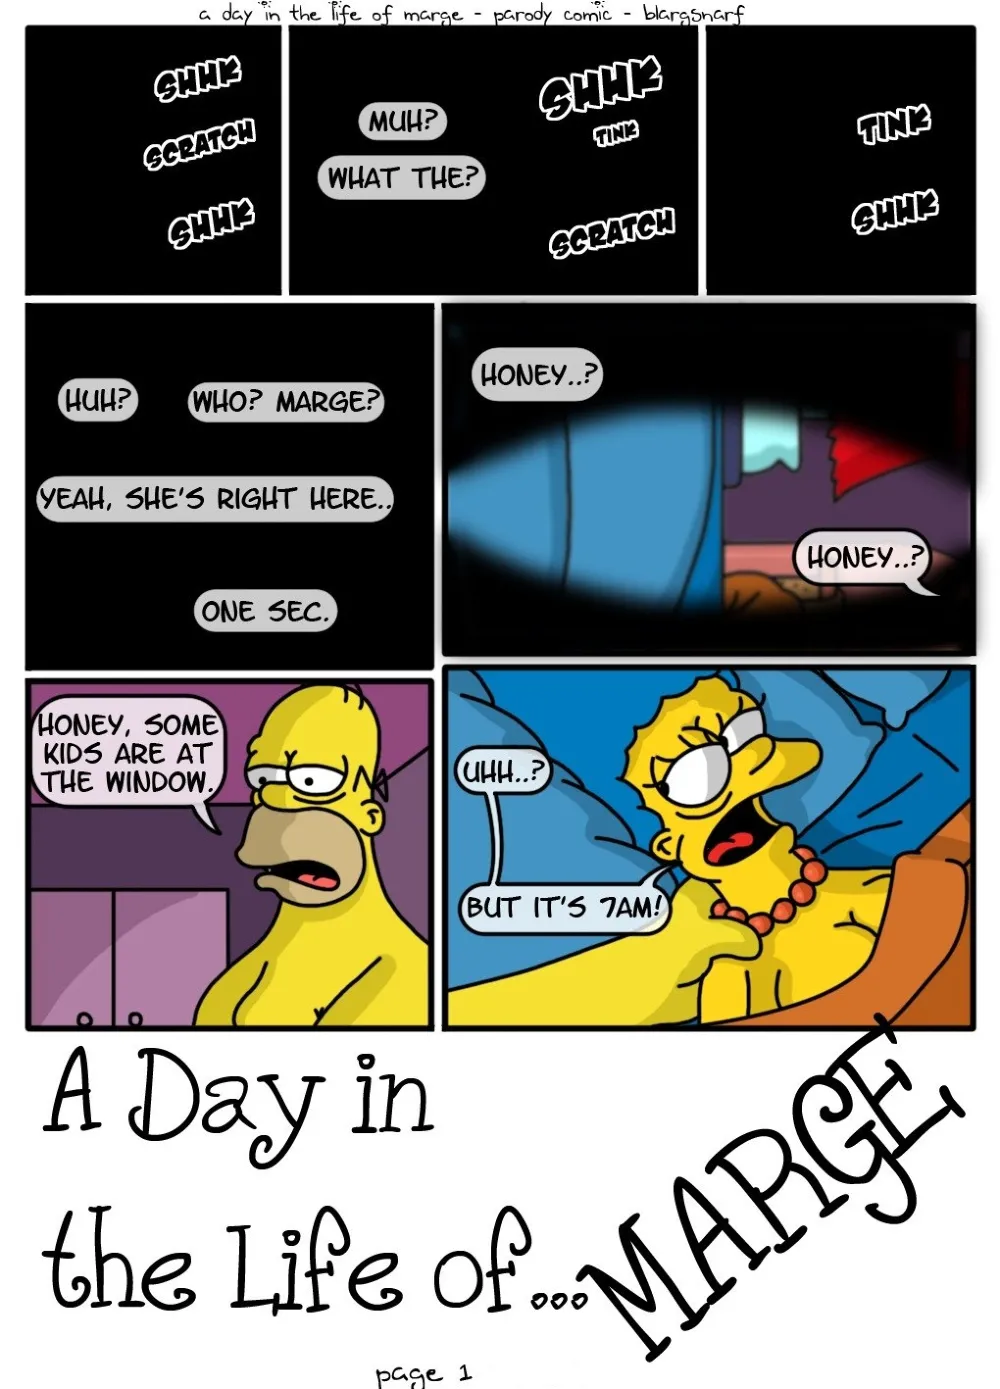 A Day in the Life of Marge - Page 1